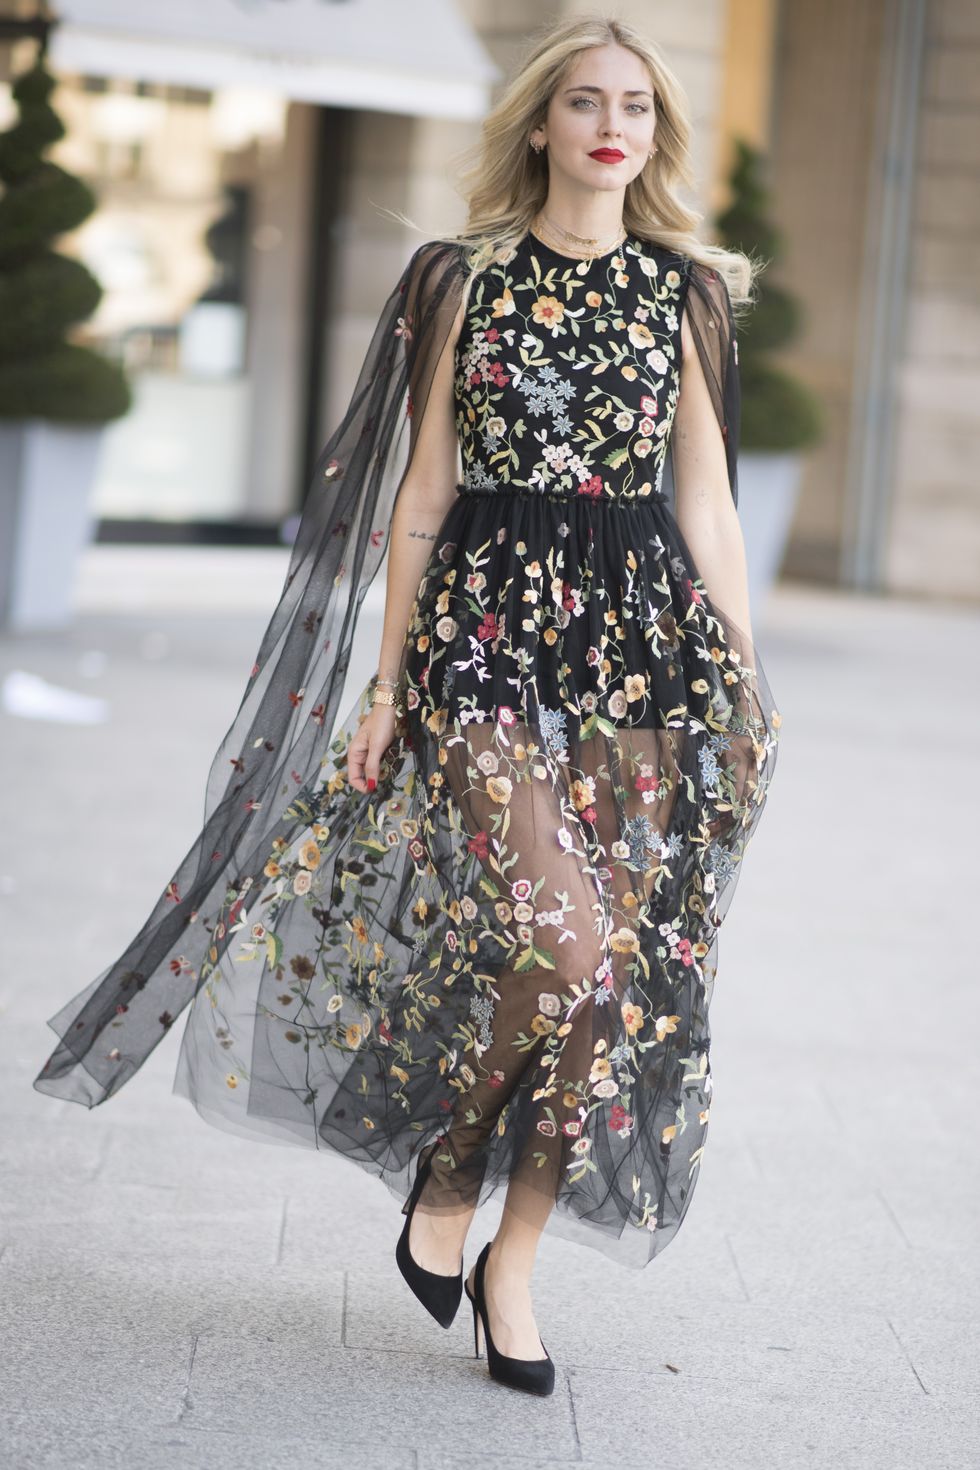 PARIS, FRANCE - JULY 04:  Chiara Ferragni seen wearing a Dior dress after the Dior Haute Coutoure show in the streets of Paris during Haute Couture  on July 4, 2017 in Paris, France.  (Photo by Timur Emek/Getty Images)